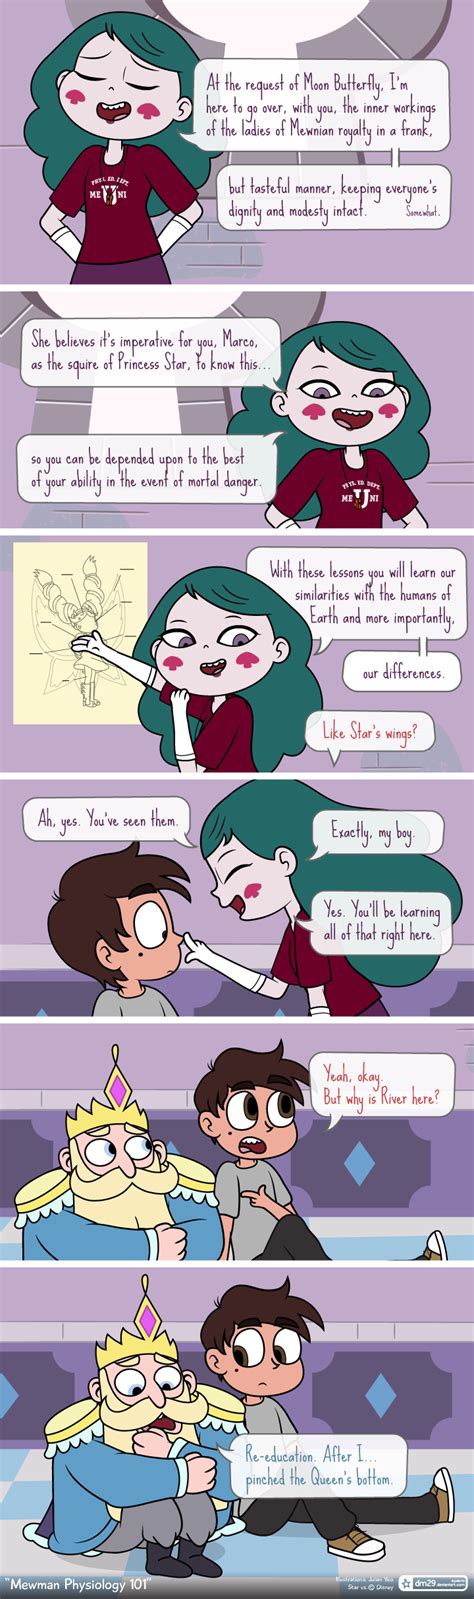 Mewman Physiology 101 By Dm29 On Deviantart